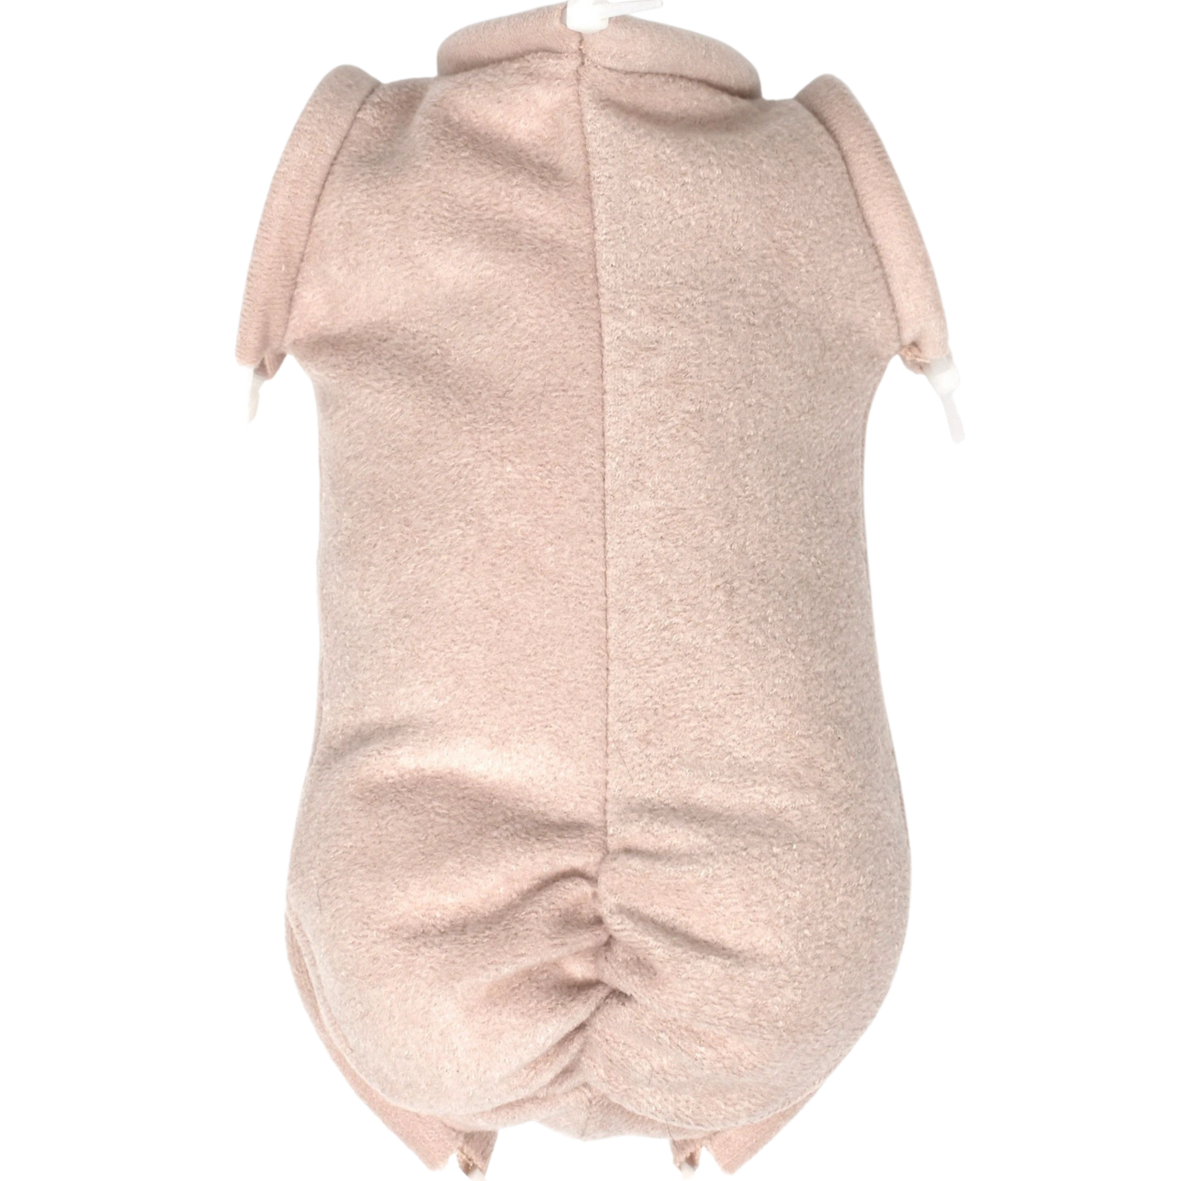 13" to 17" Doe Suede Body For Reborn Doll Kits ~ 3 Sizes and 3 Colors